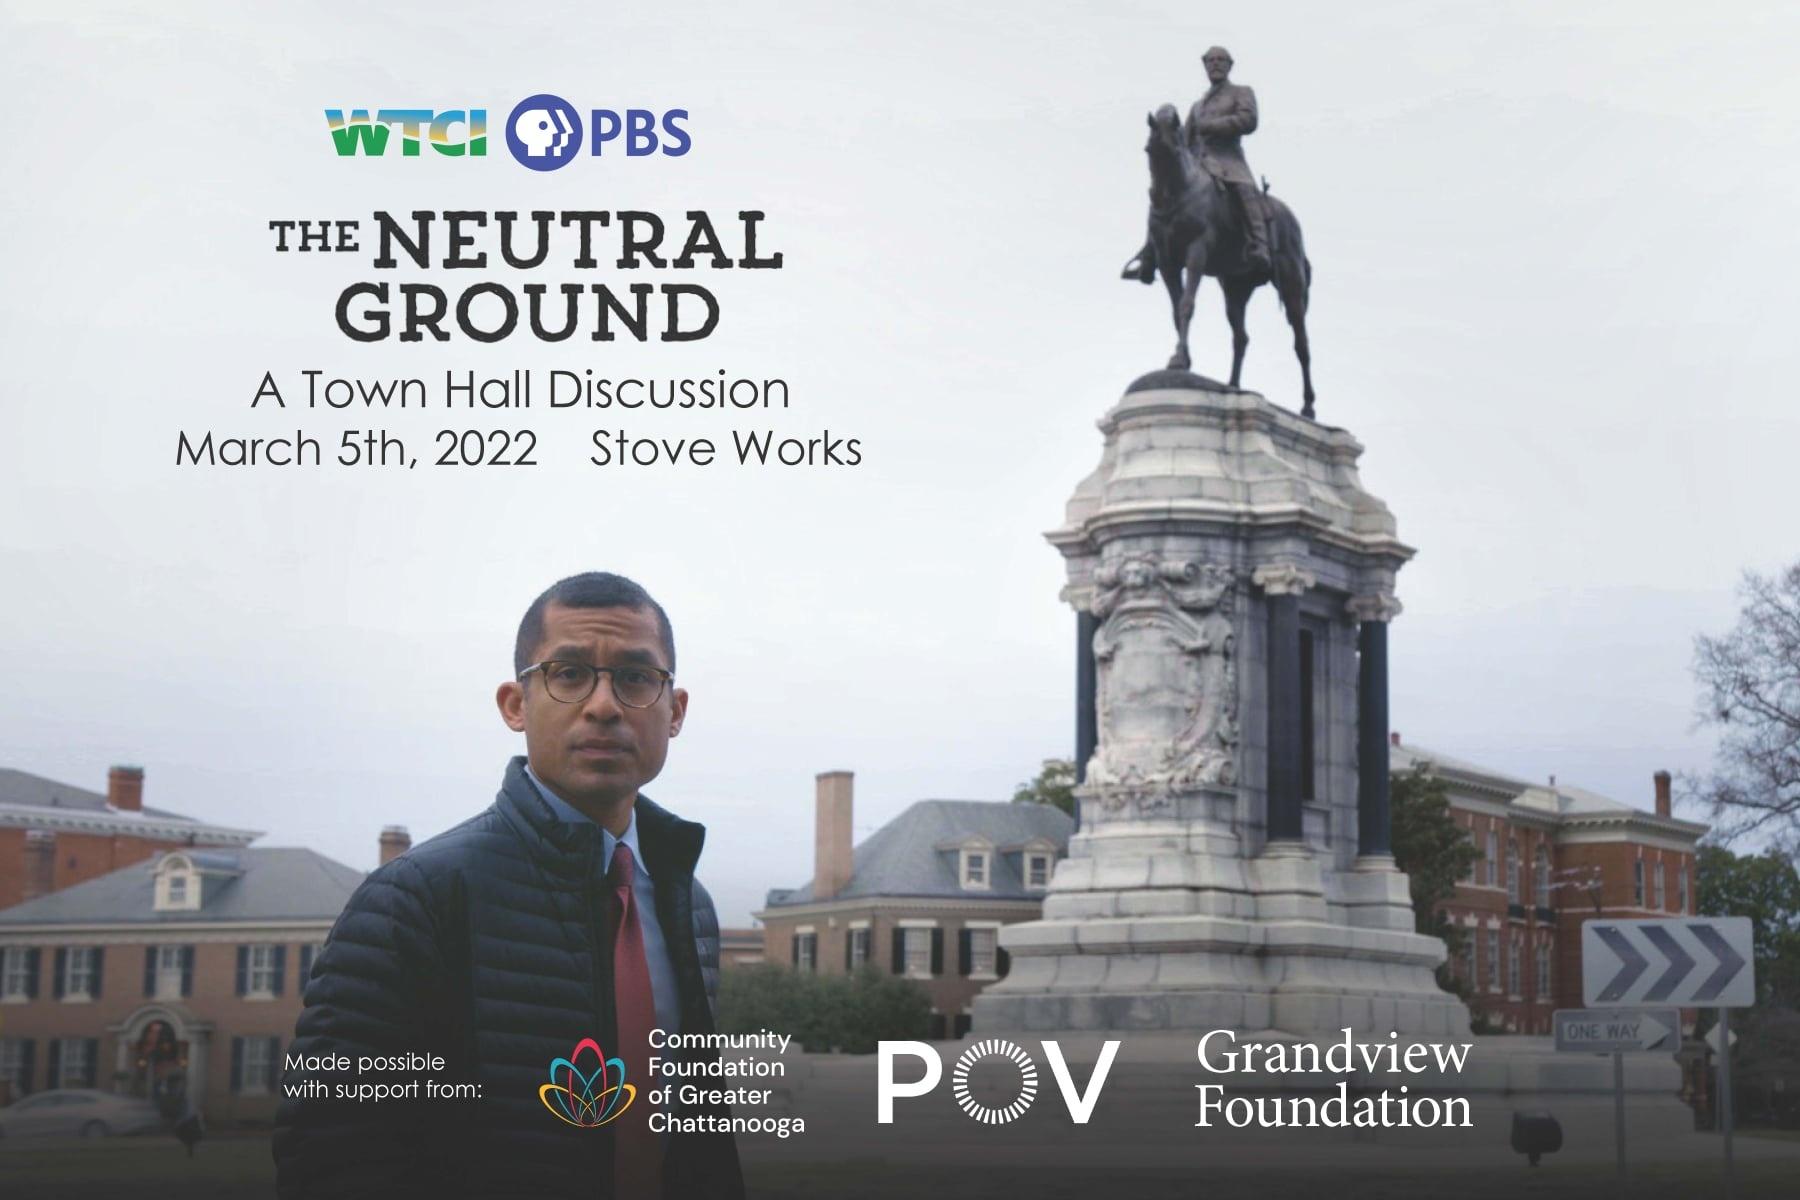 Photo of filmmaker CJ Hunt and a confederate monument in the background with WTCI PBS Logo, The Neutral Ground logo, and text that reads "A Town Hall Discussion March 5th 2022, Stove Works" and the event sponsor logos